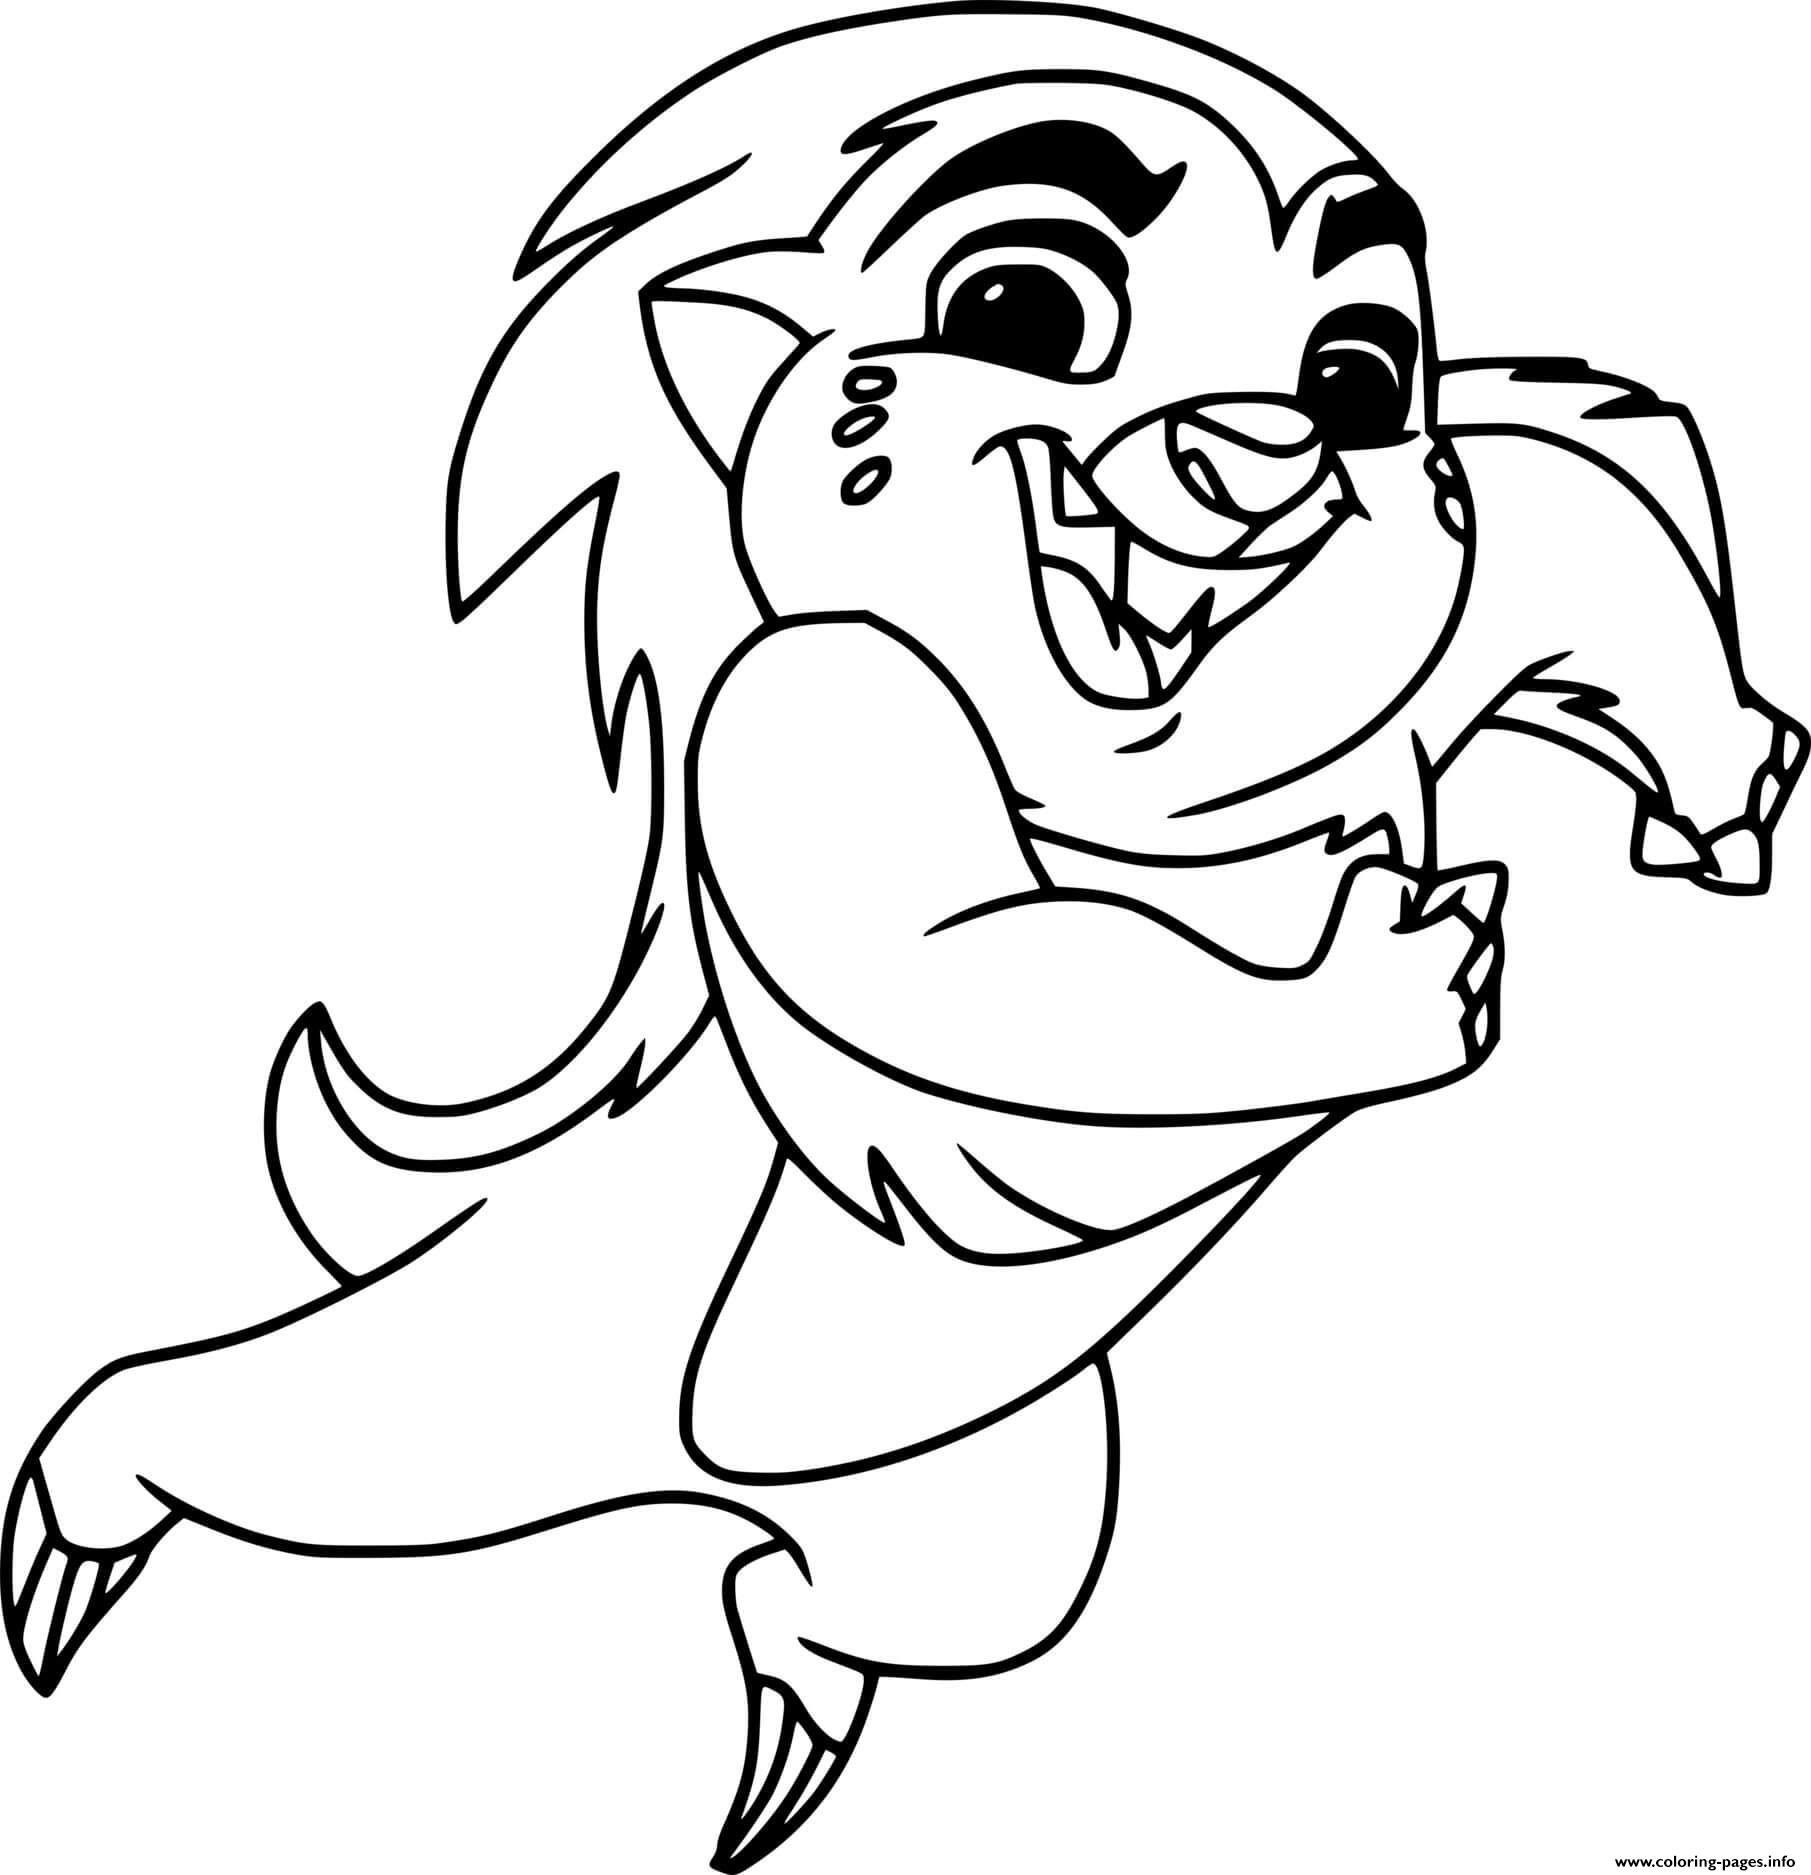 Bunga Running coloring pages